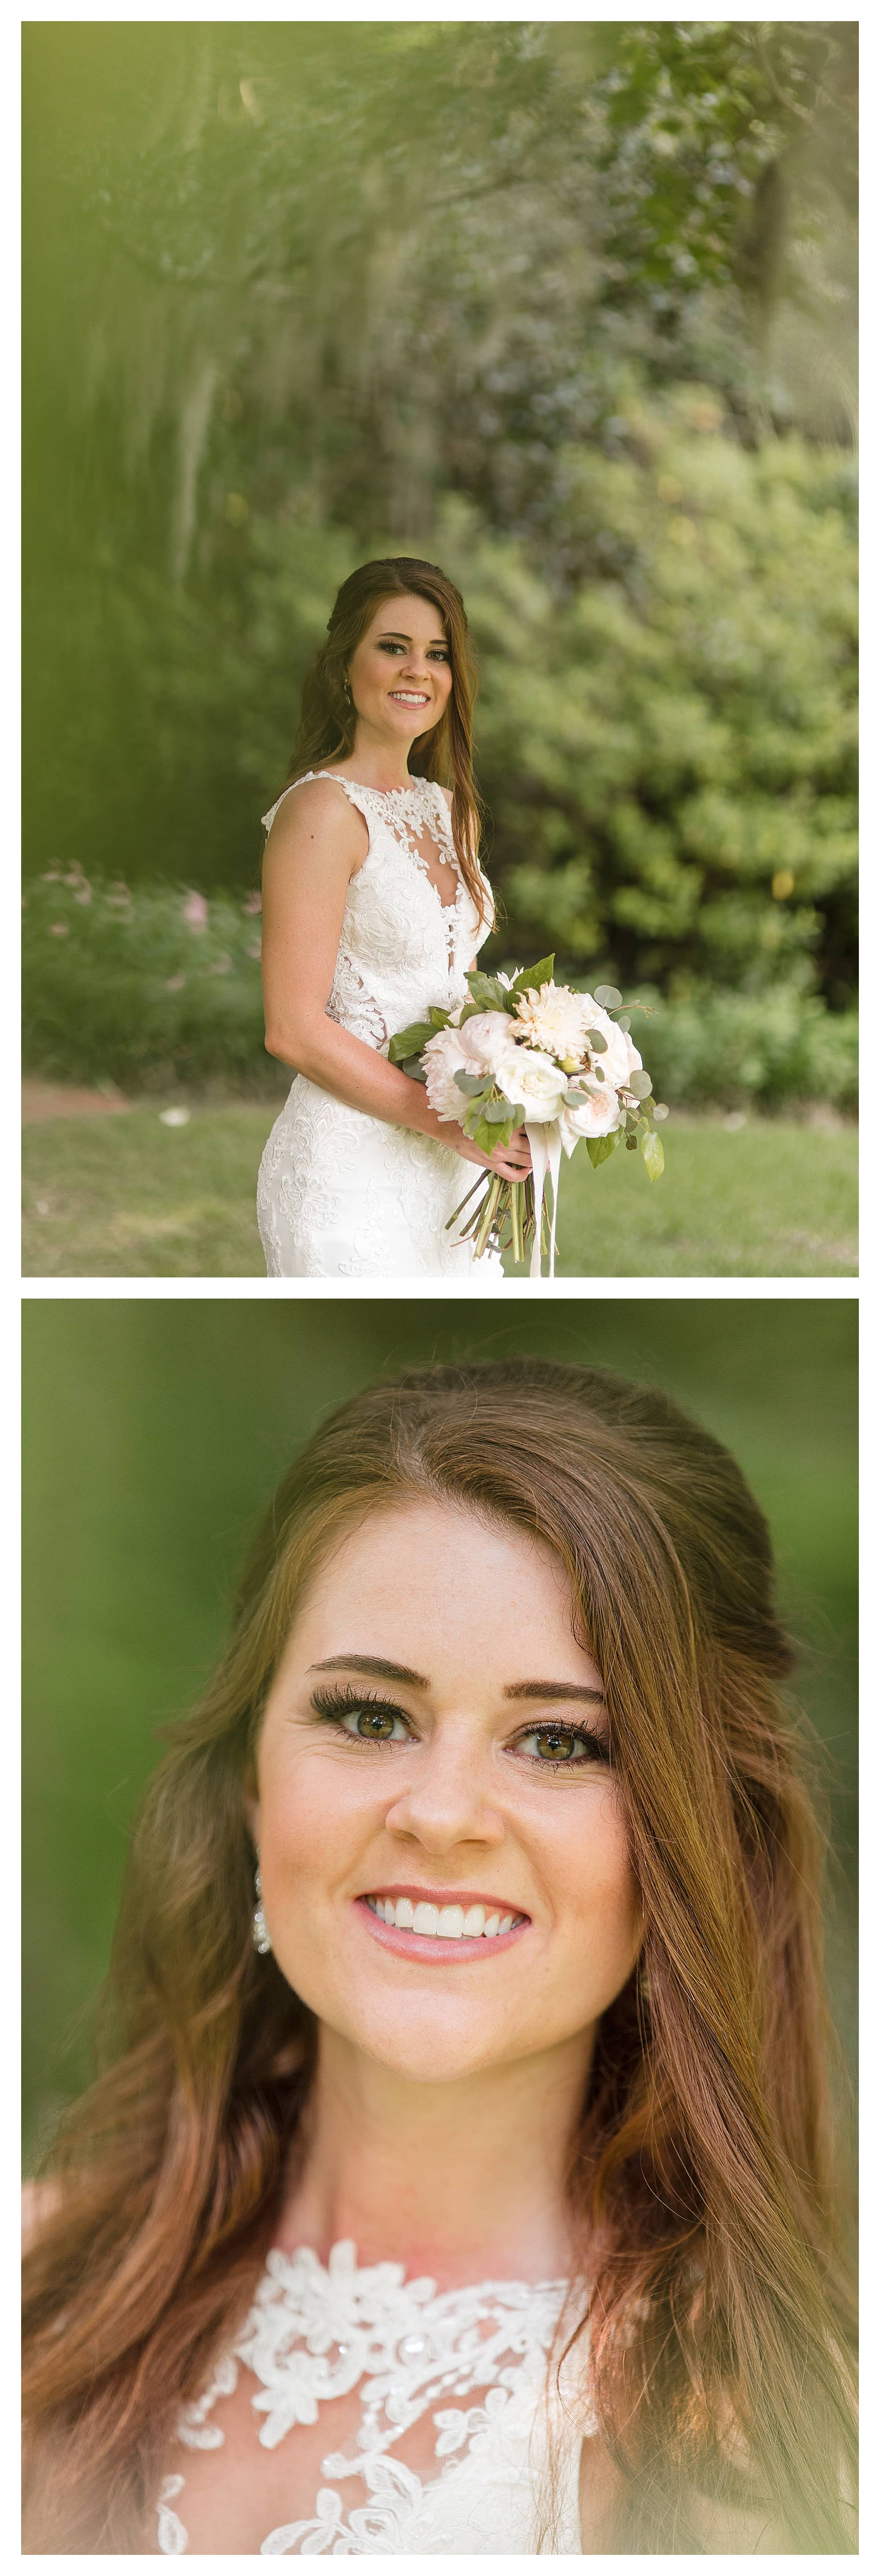 Close up of young bride smiling standing under a tree holding cream floral bouquet